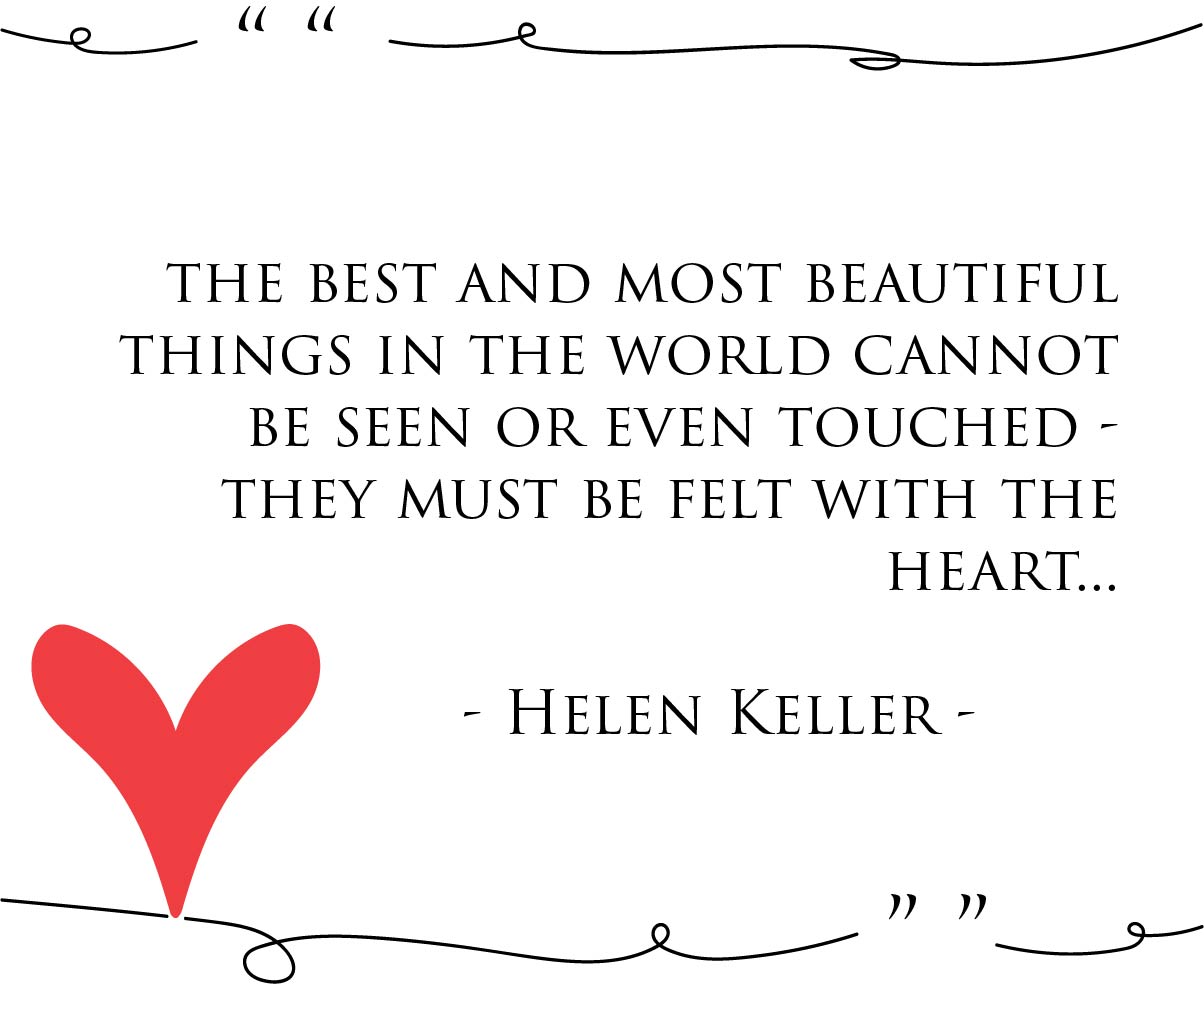 reflection about the story of helen keller